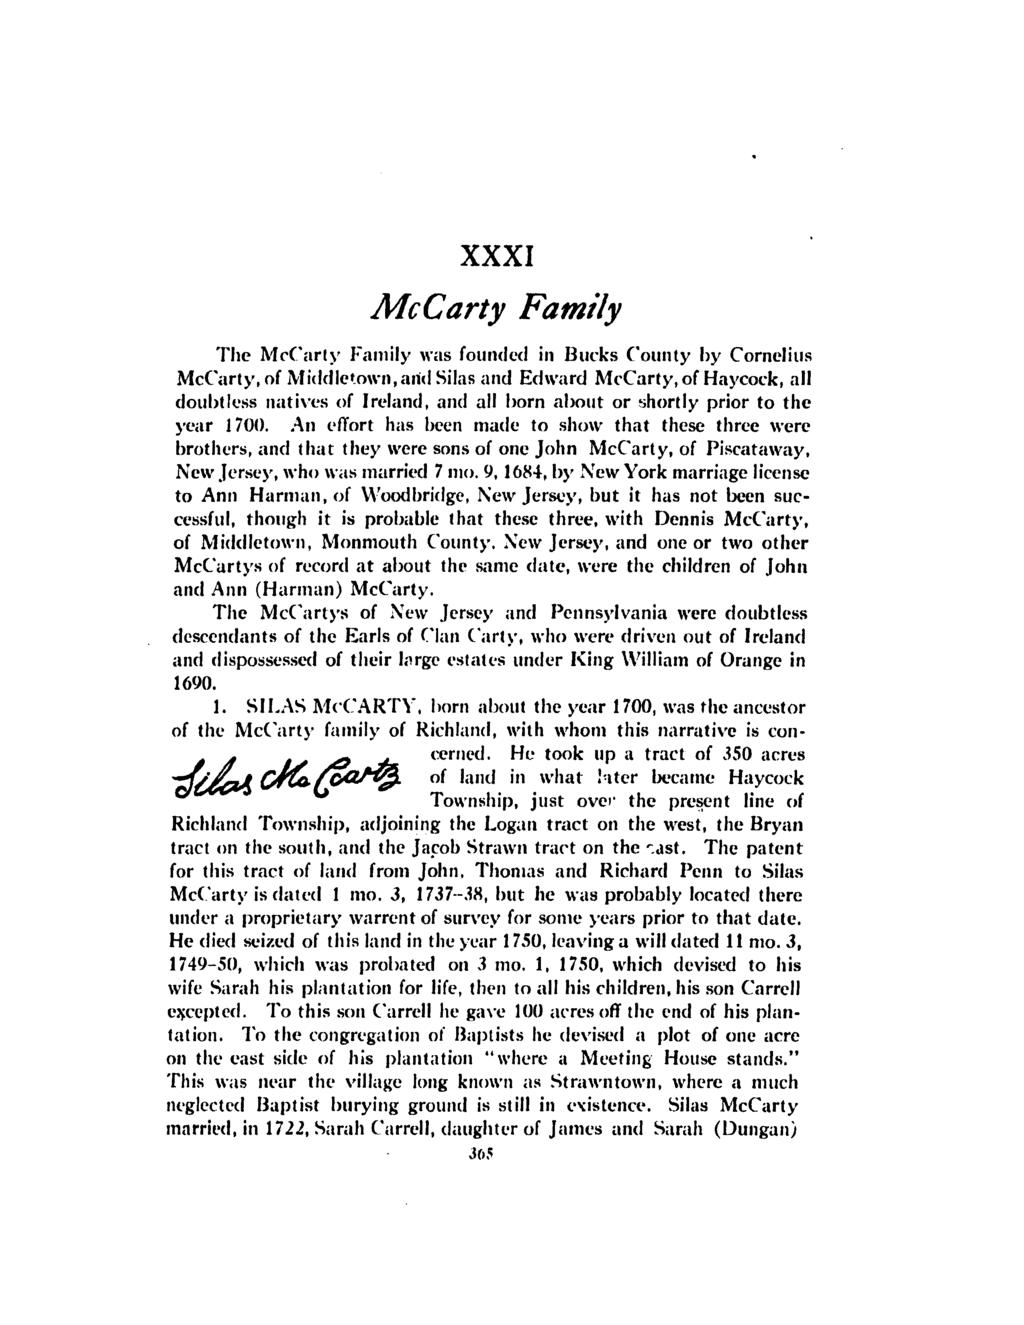 XXXI McCarty Family The McCarty Family was founded in Bucks County by Cornelius McCarty, of Middletown, and Silas and Edward McCarty, of Haycock, all doubtless natives of Ireland, and all born about